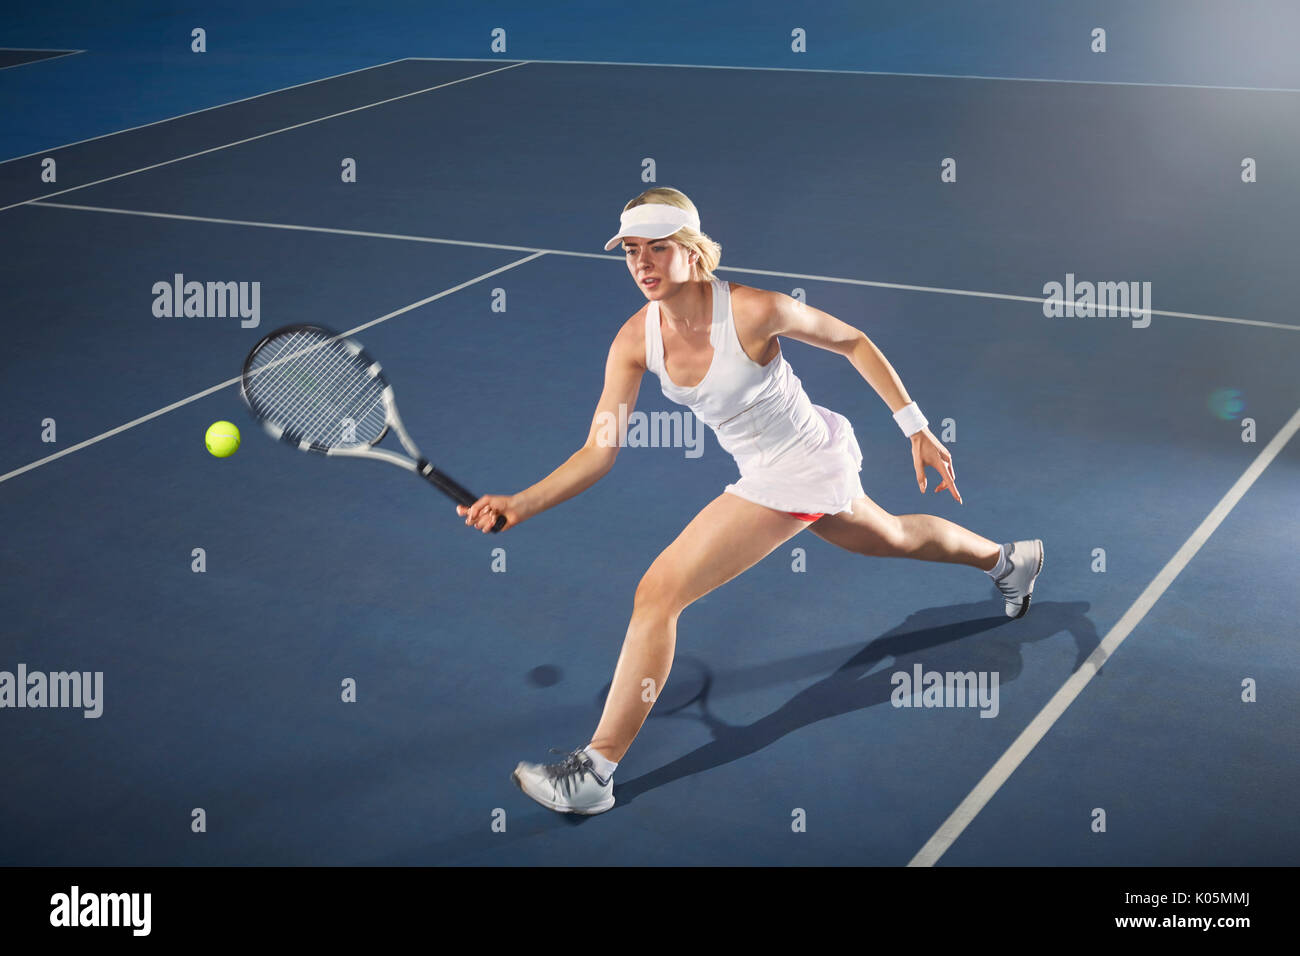 Young woman playing tennis on tennis court Stock Photo